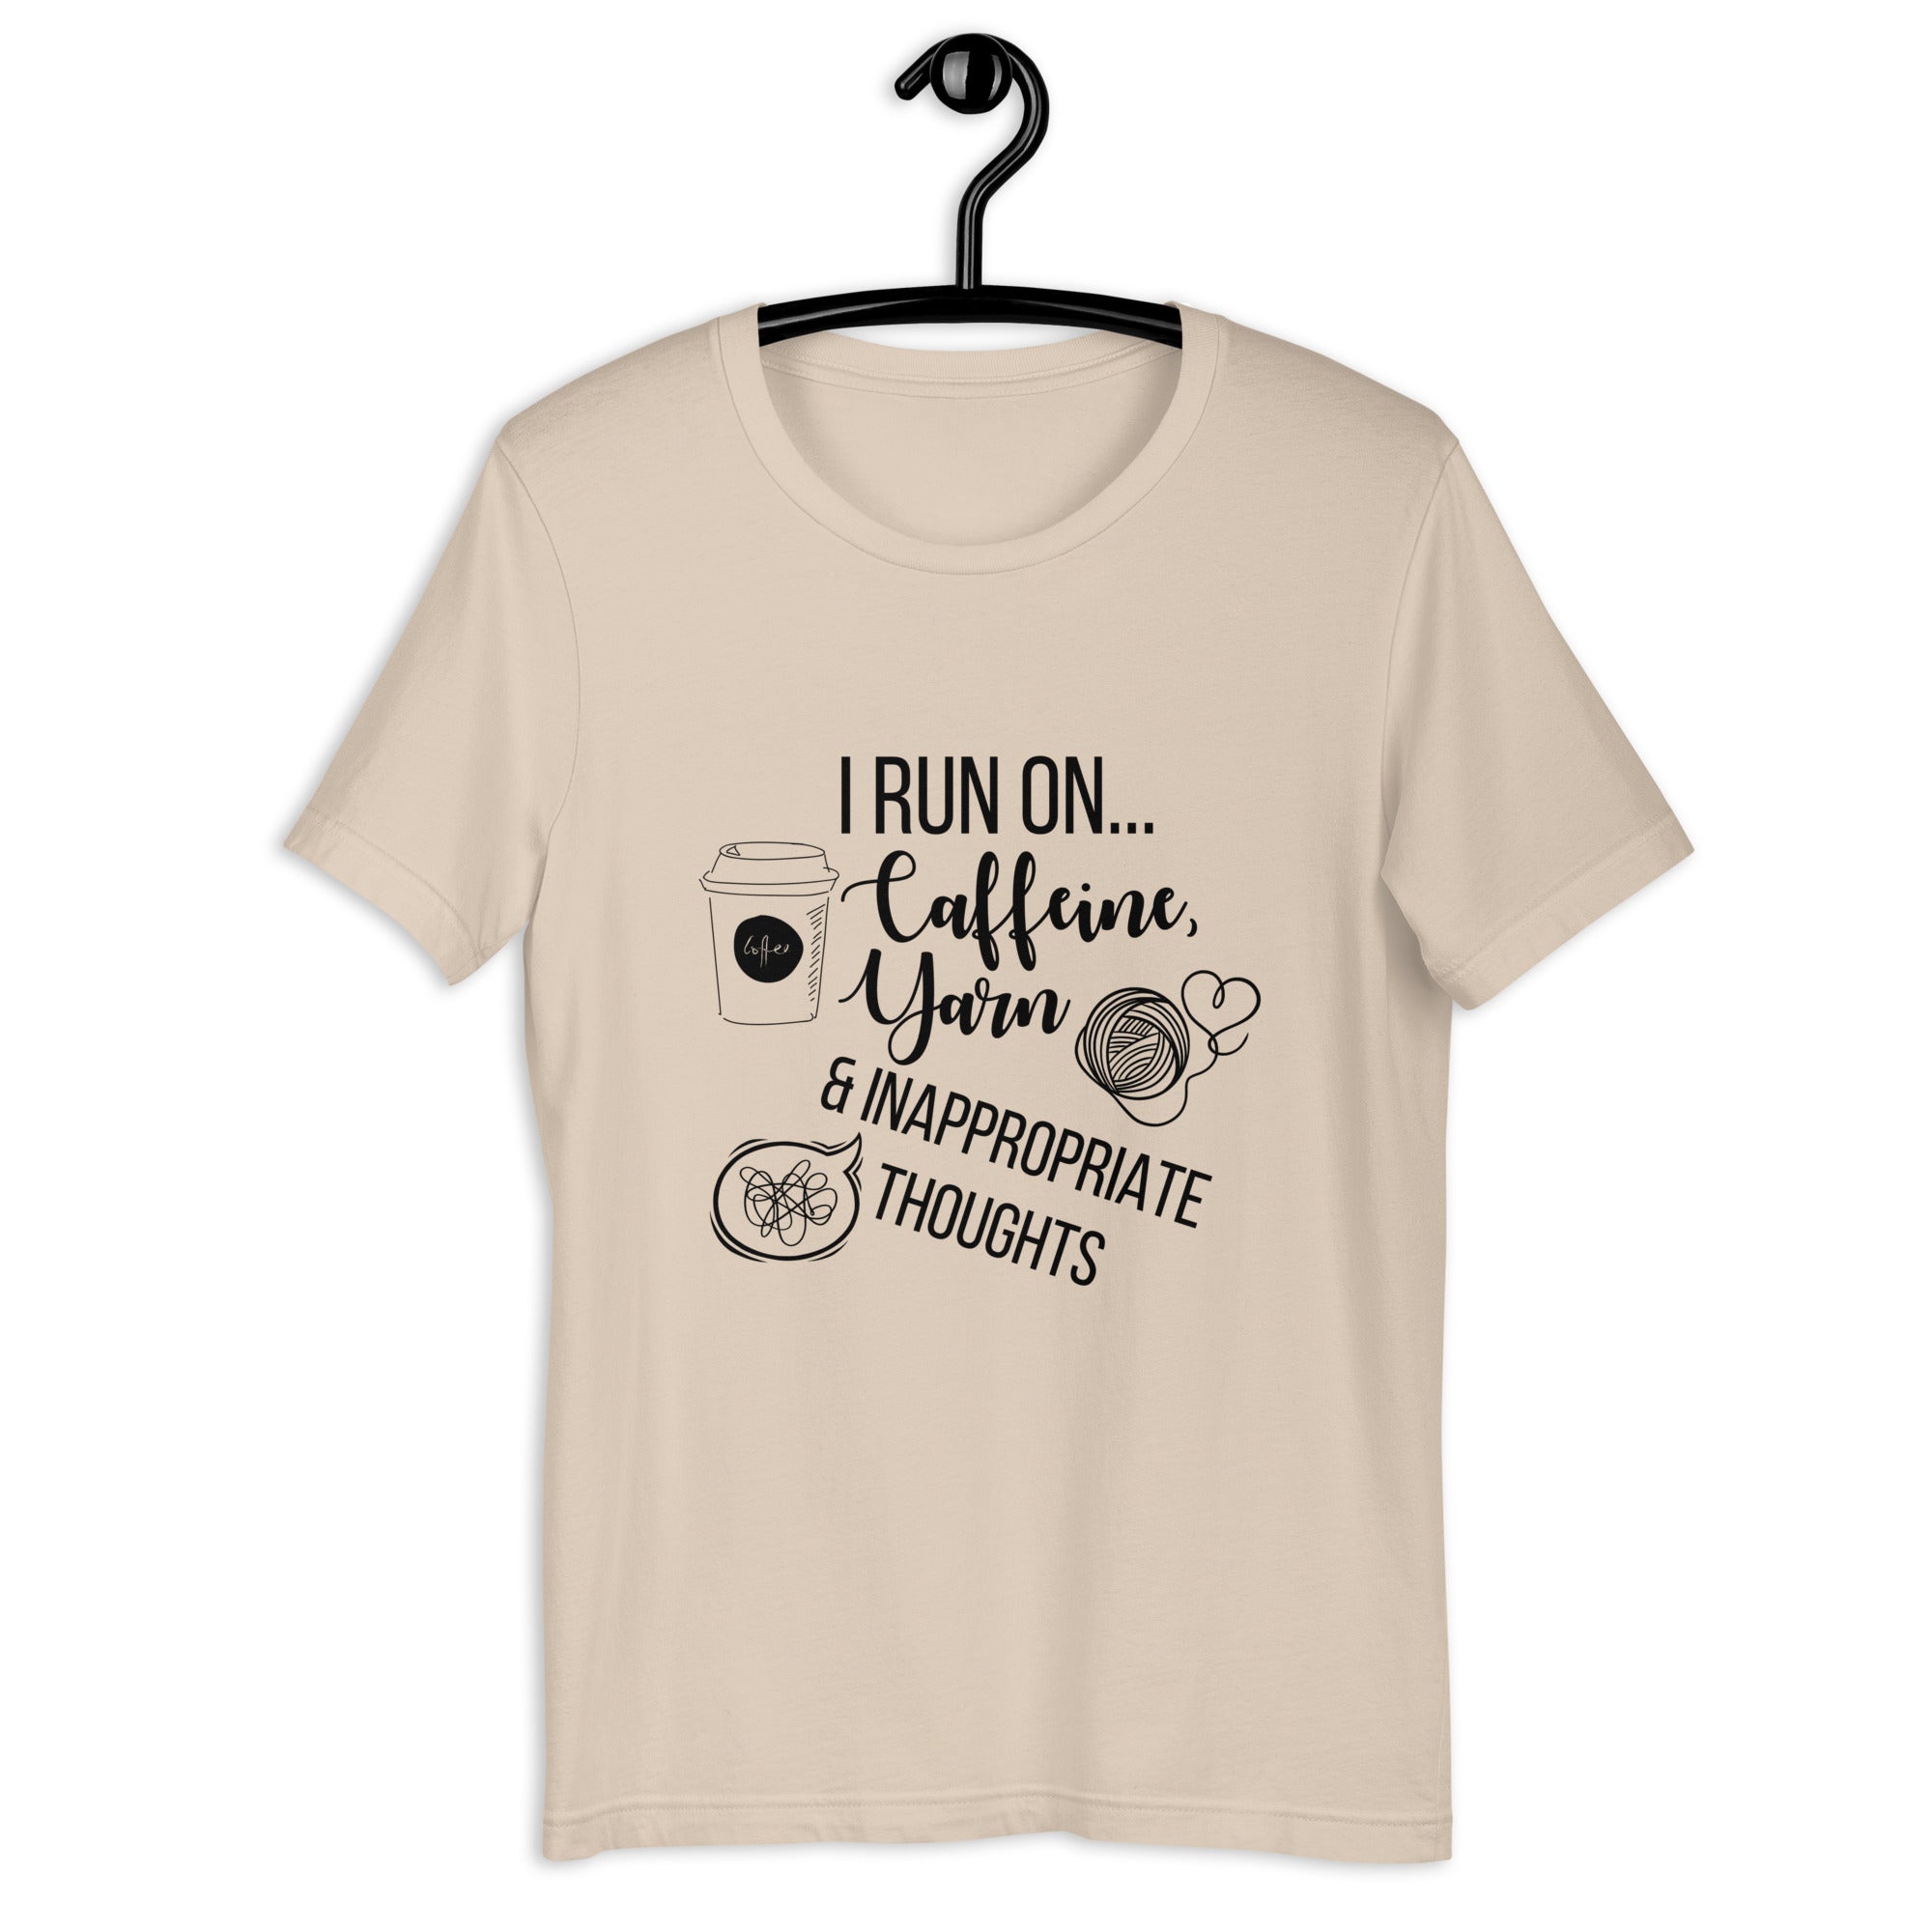 "I Run On Caffeine, Yarn, & Inappropriate Thoughts" Unisex Scoop Neck T-shirt, Black Text On Light Fabric